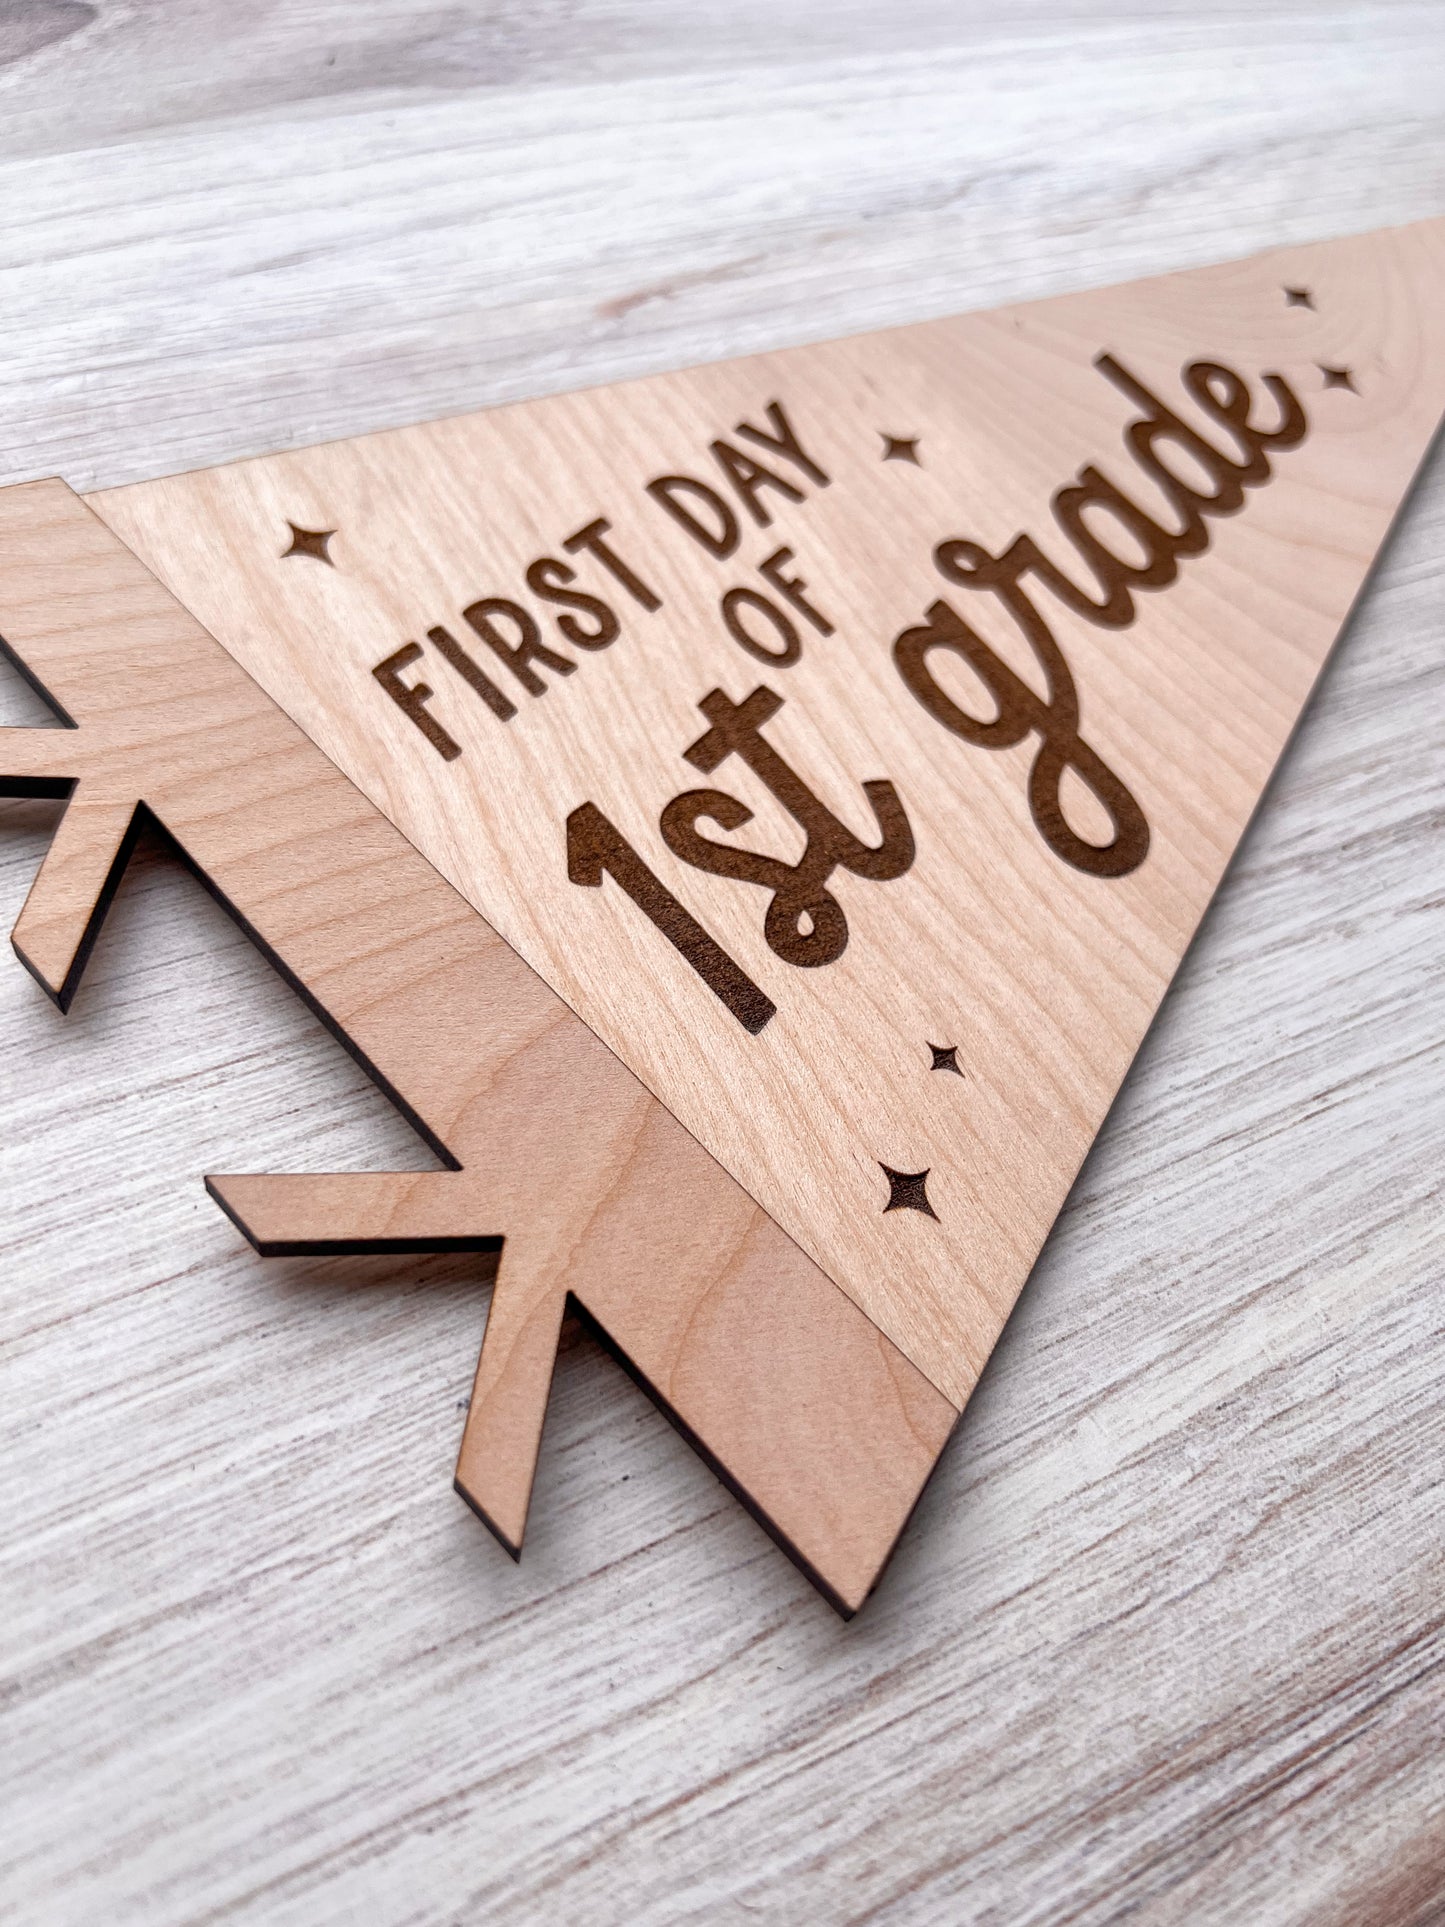 First Day of School Pennant Flag Sign | Wood